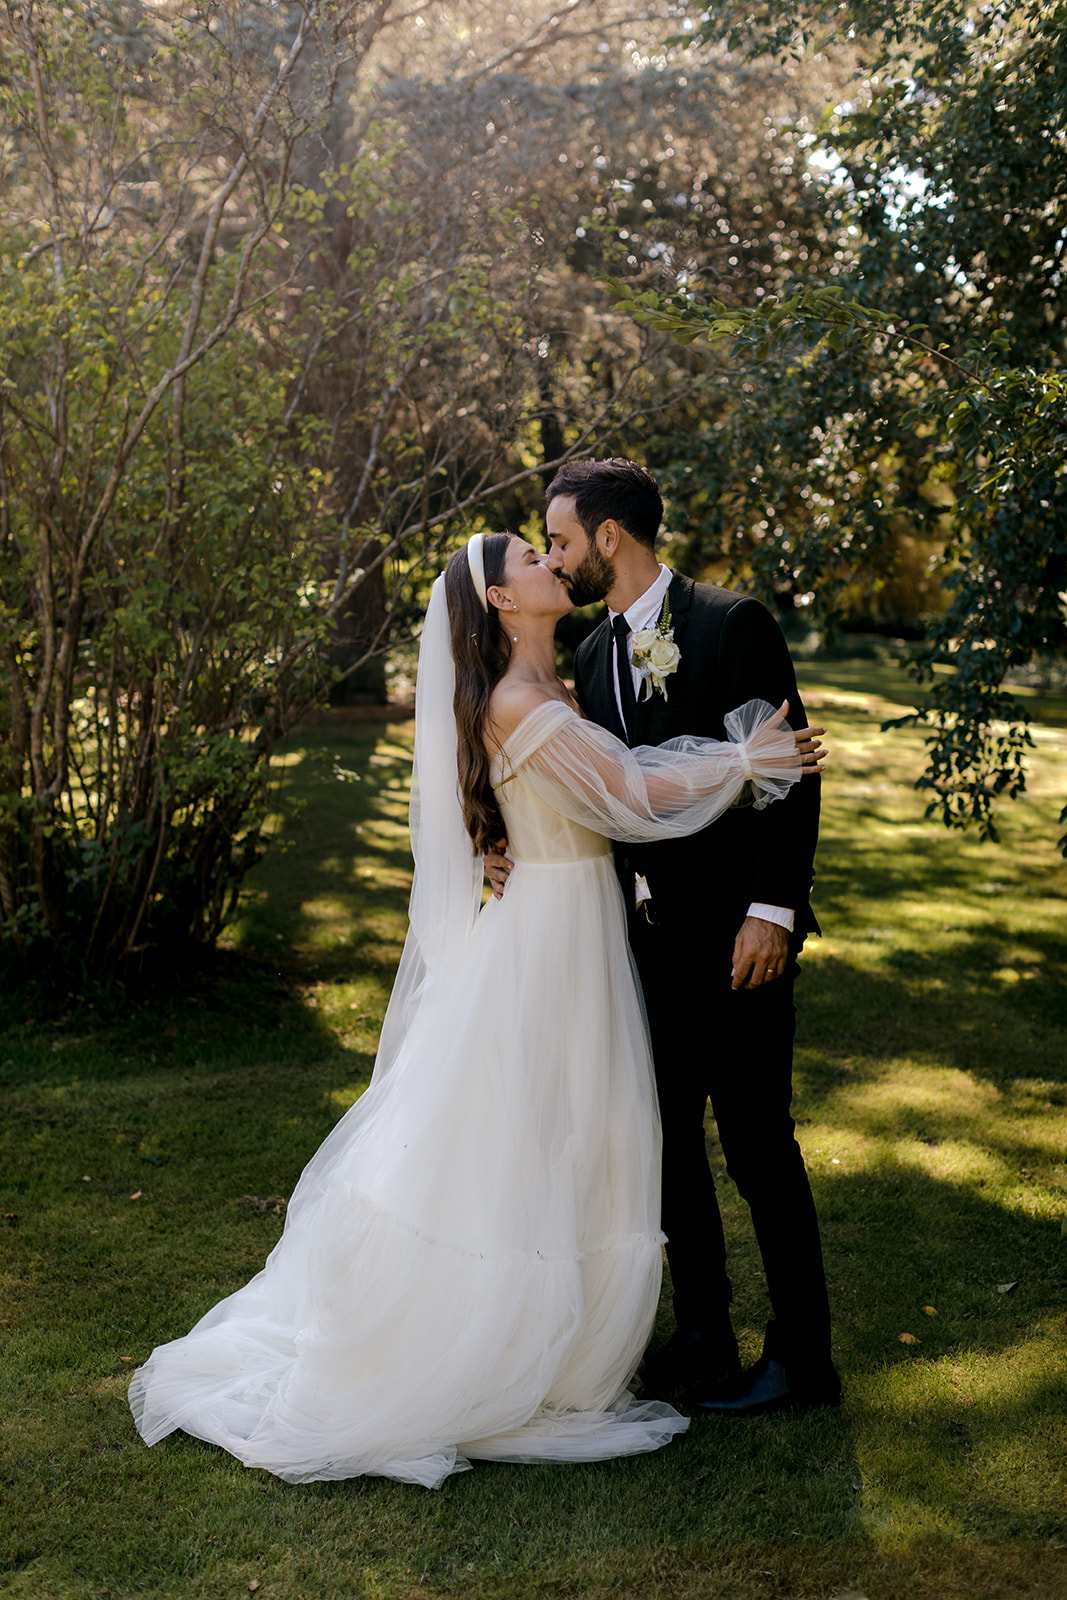 Portrait of bride & groom kissing in an English-inspired garden during their elegant country wedding.